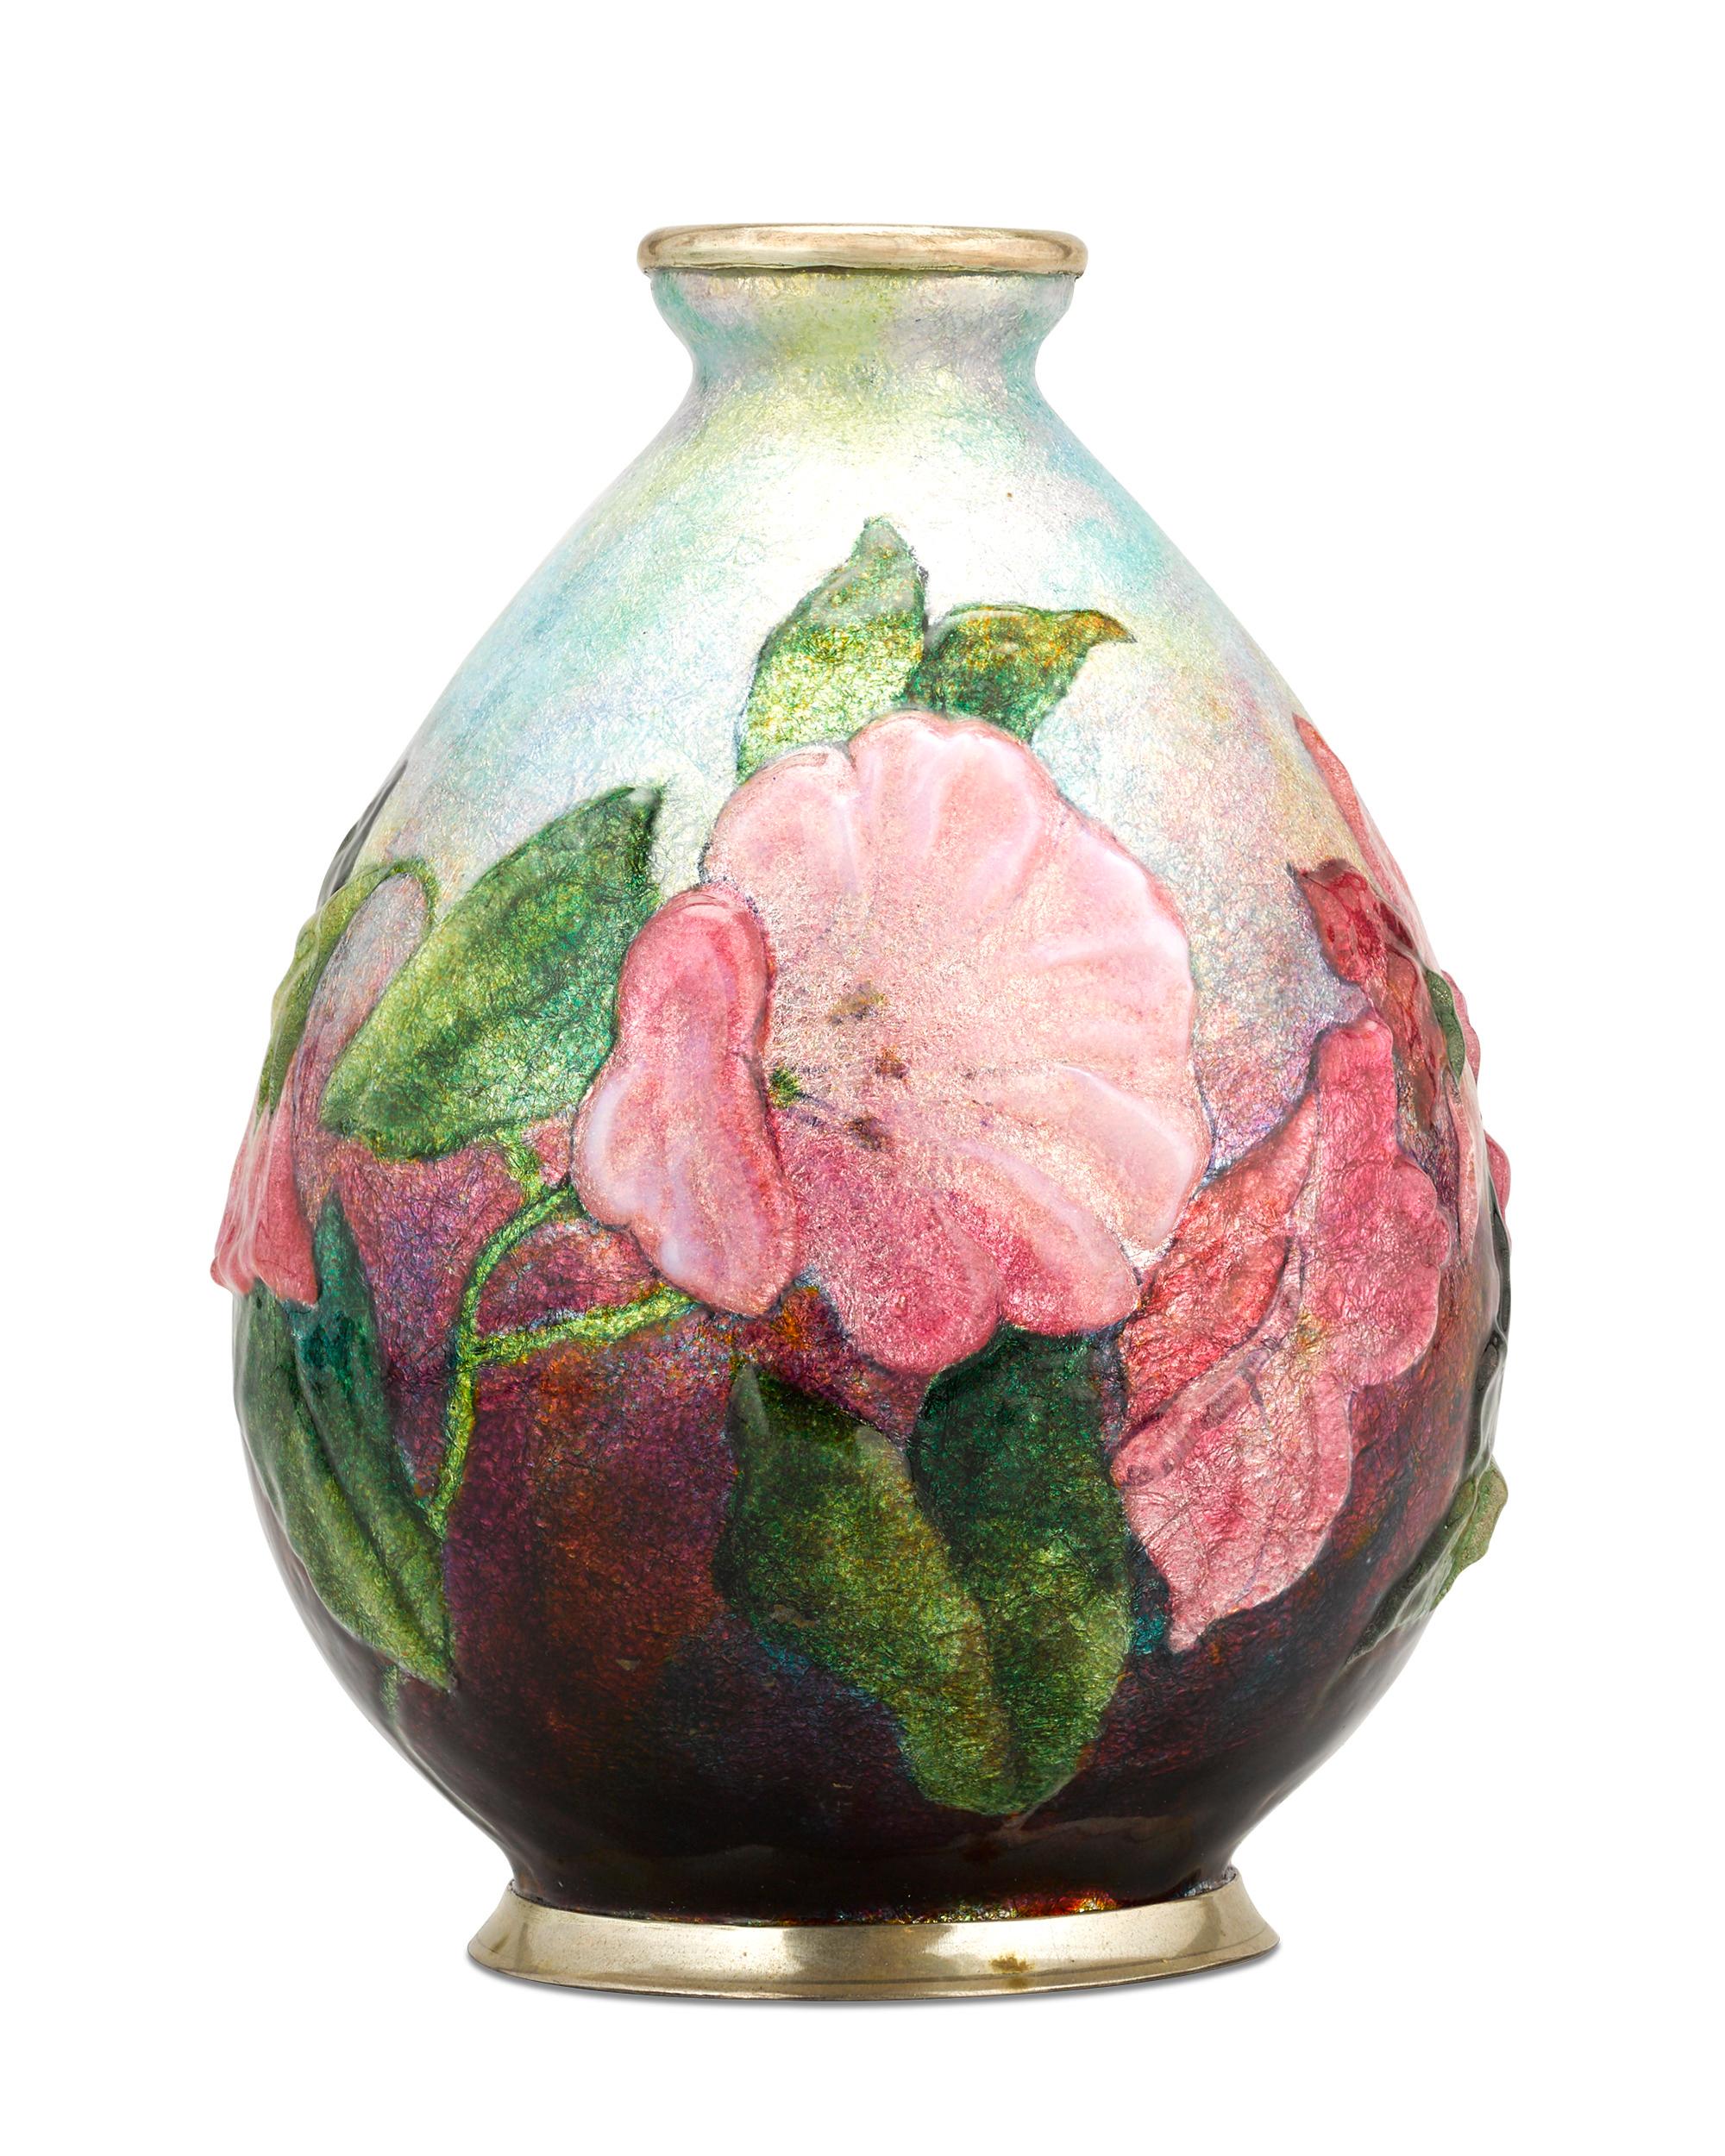 This charming floral vase by master Art Deco decorative artist Camille Fauré possesses both a visual and tactile beauty achieved through Fauré's signature enameling technique. Starting with a copper vase form covered in silver leaf, layers of